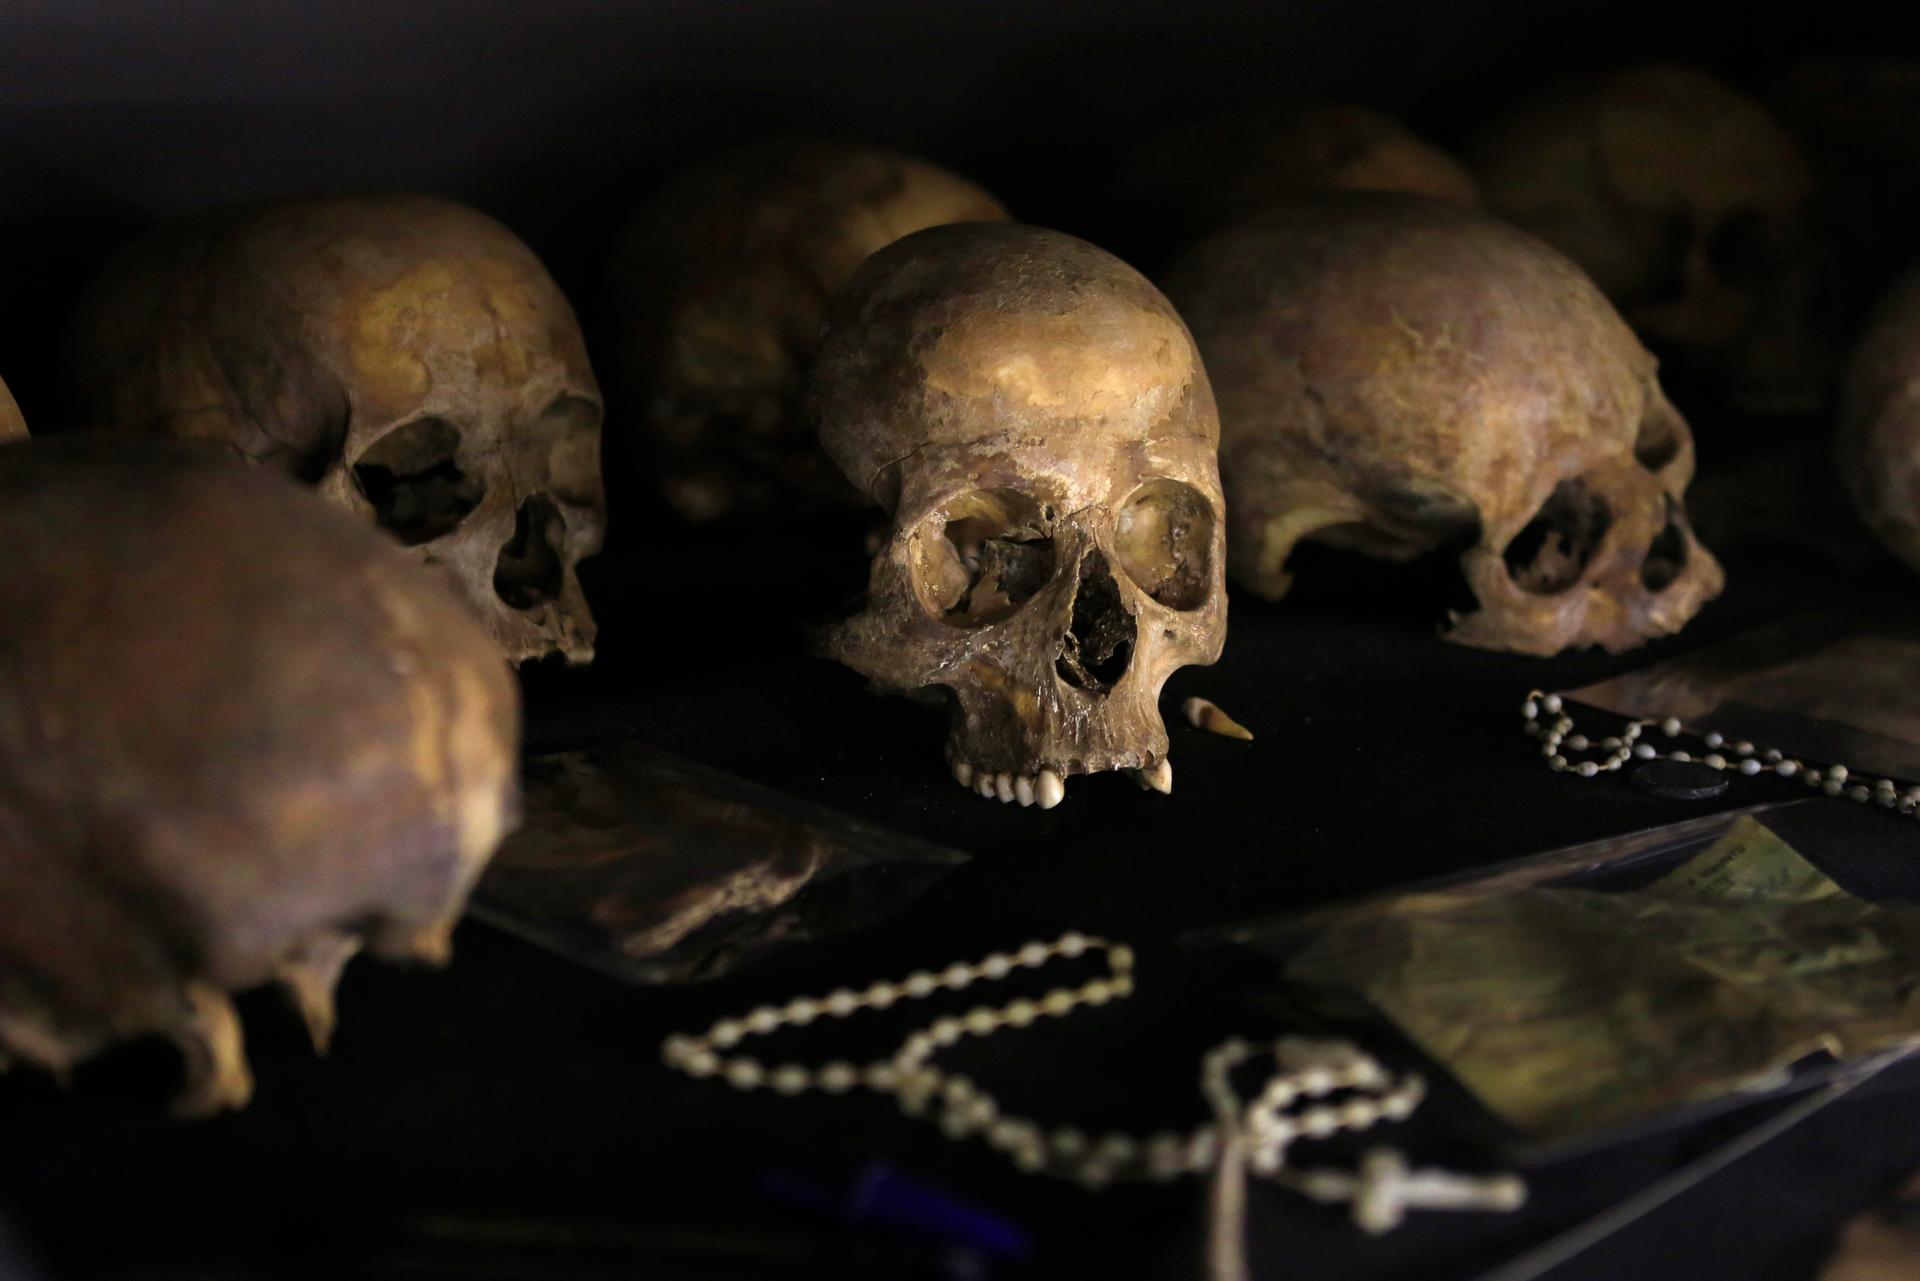 Preserved human skulls are seen on display at the Kigali Genocide Memorial Centre in Kigali, Rwanda.